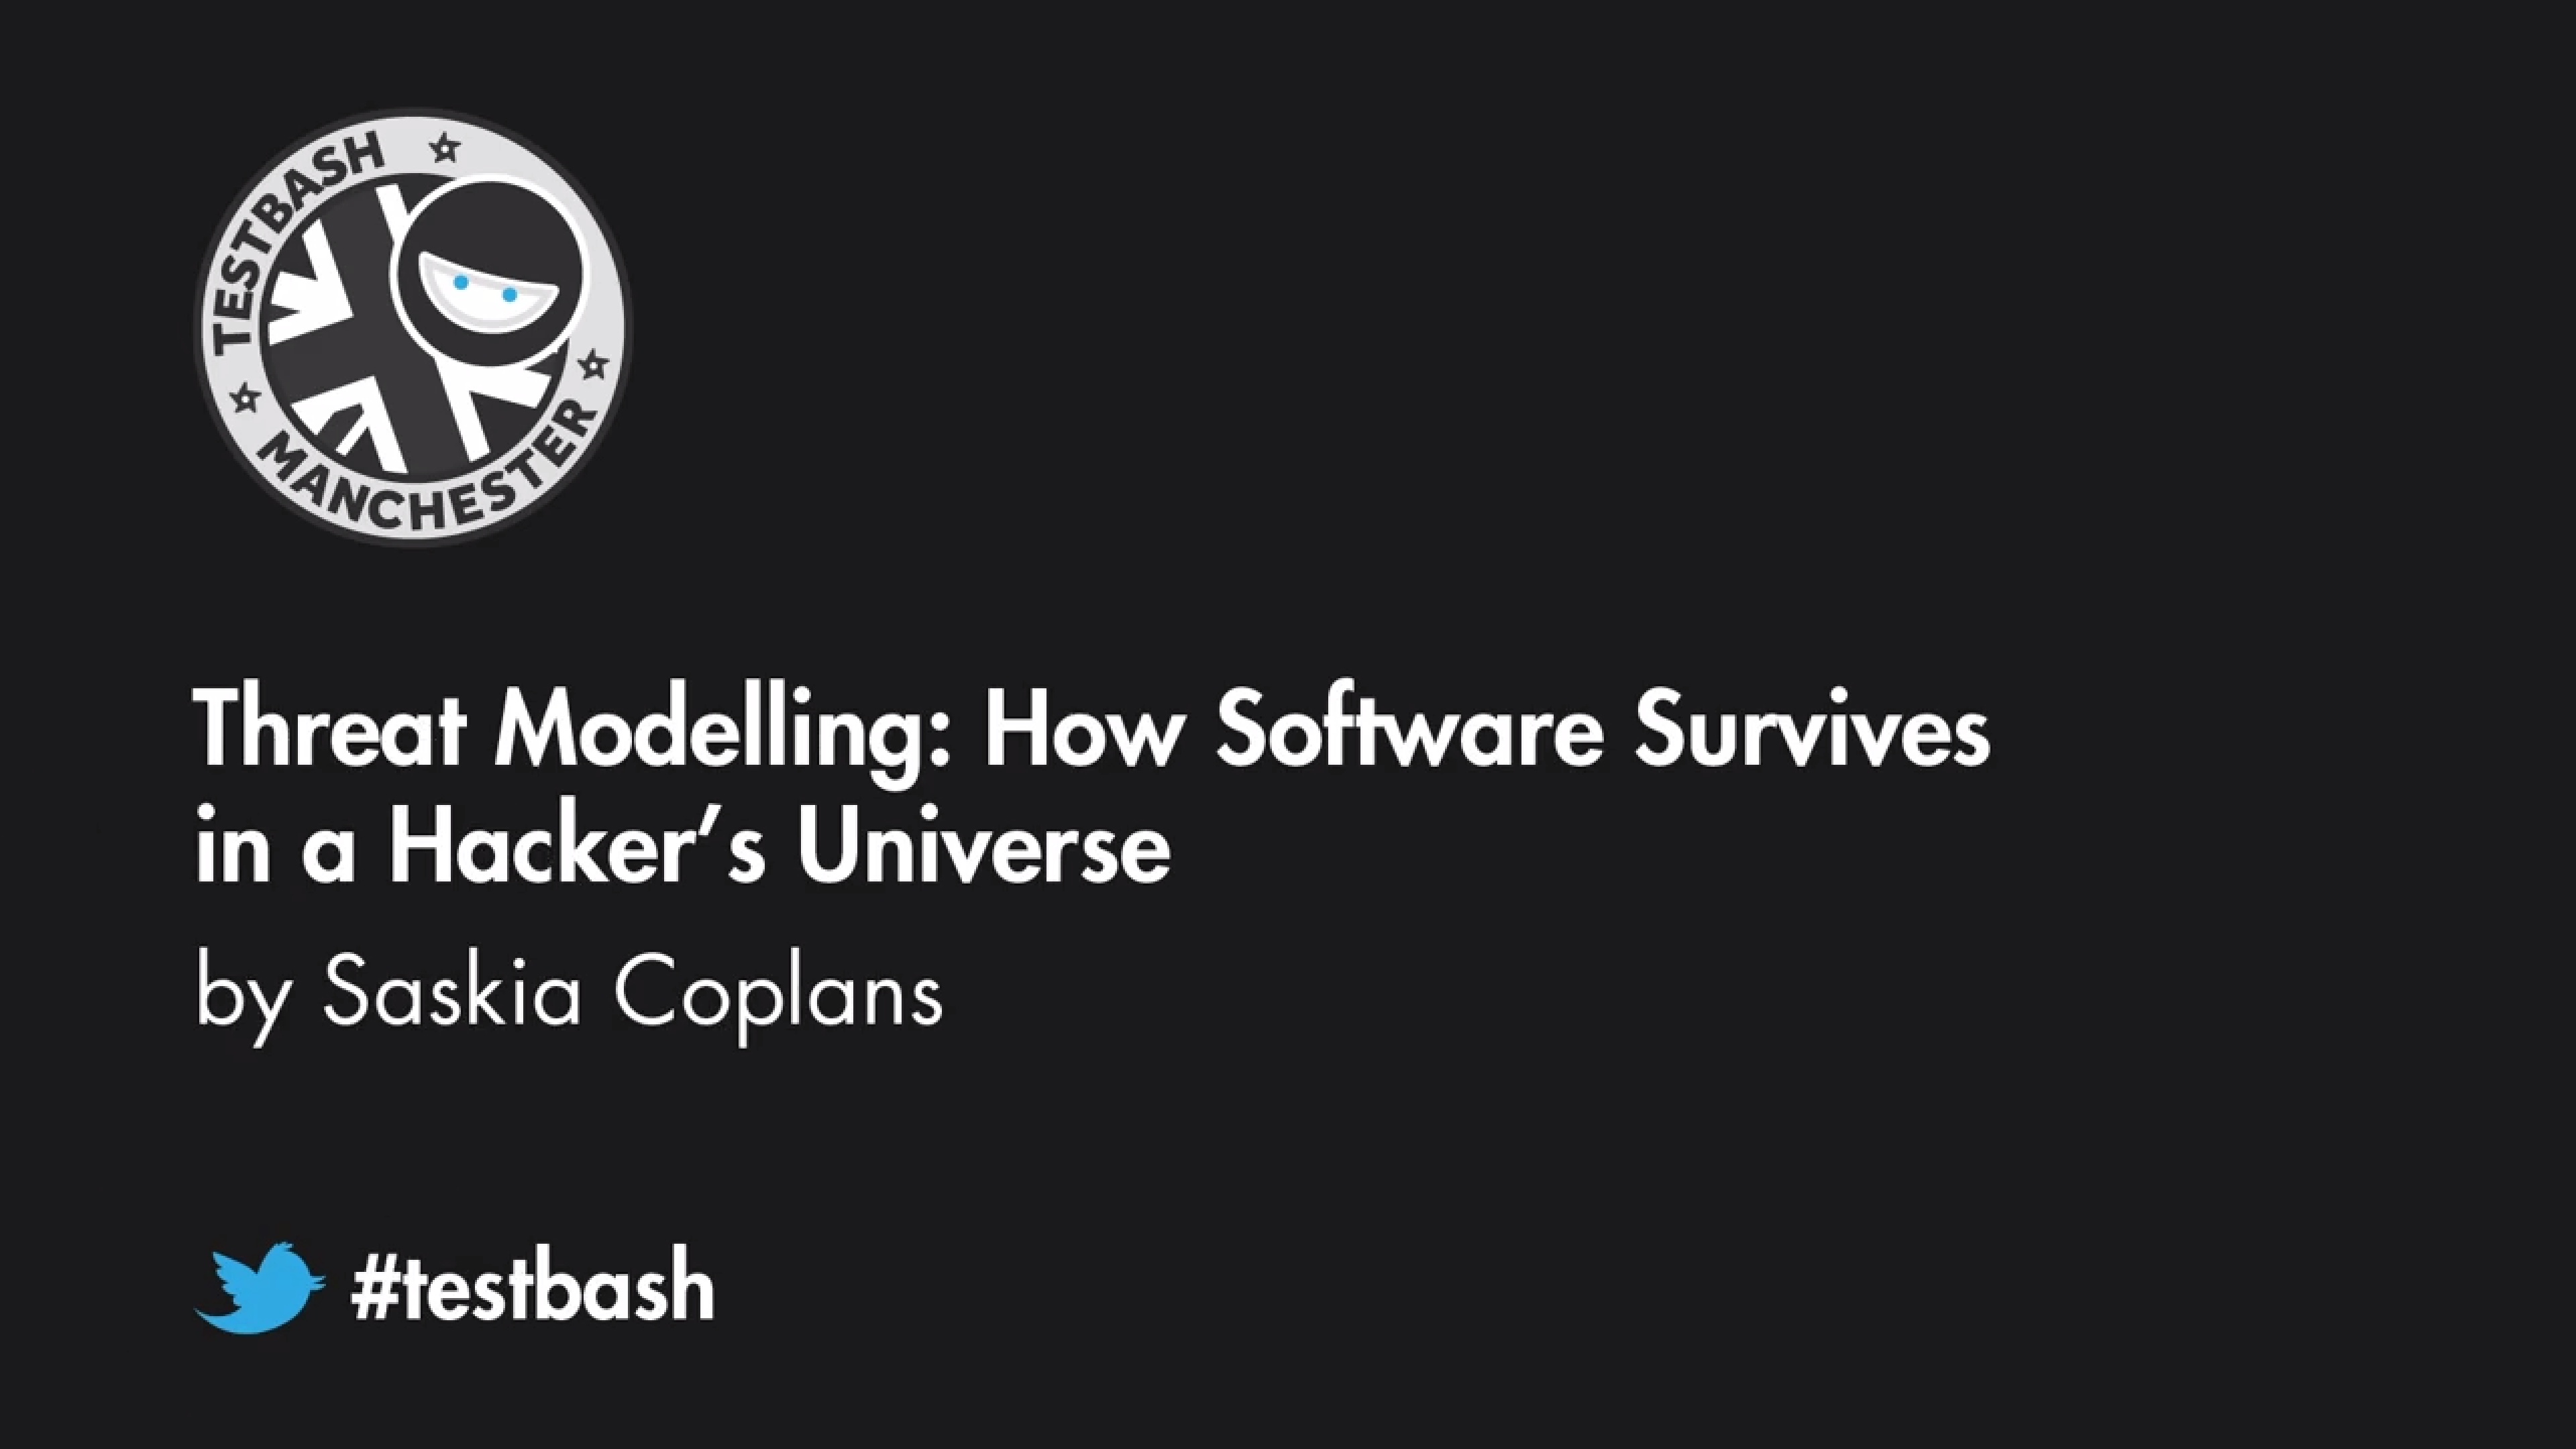 Threat Modelling: How Software Survives in a Hacker’s Universe Saskia Coplans